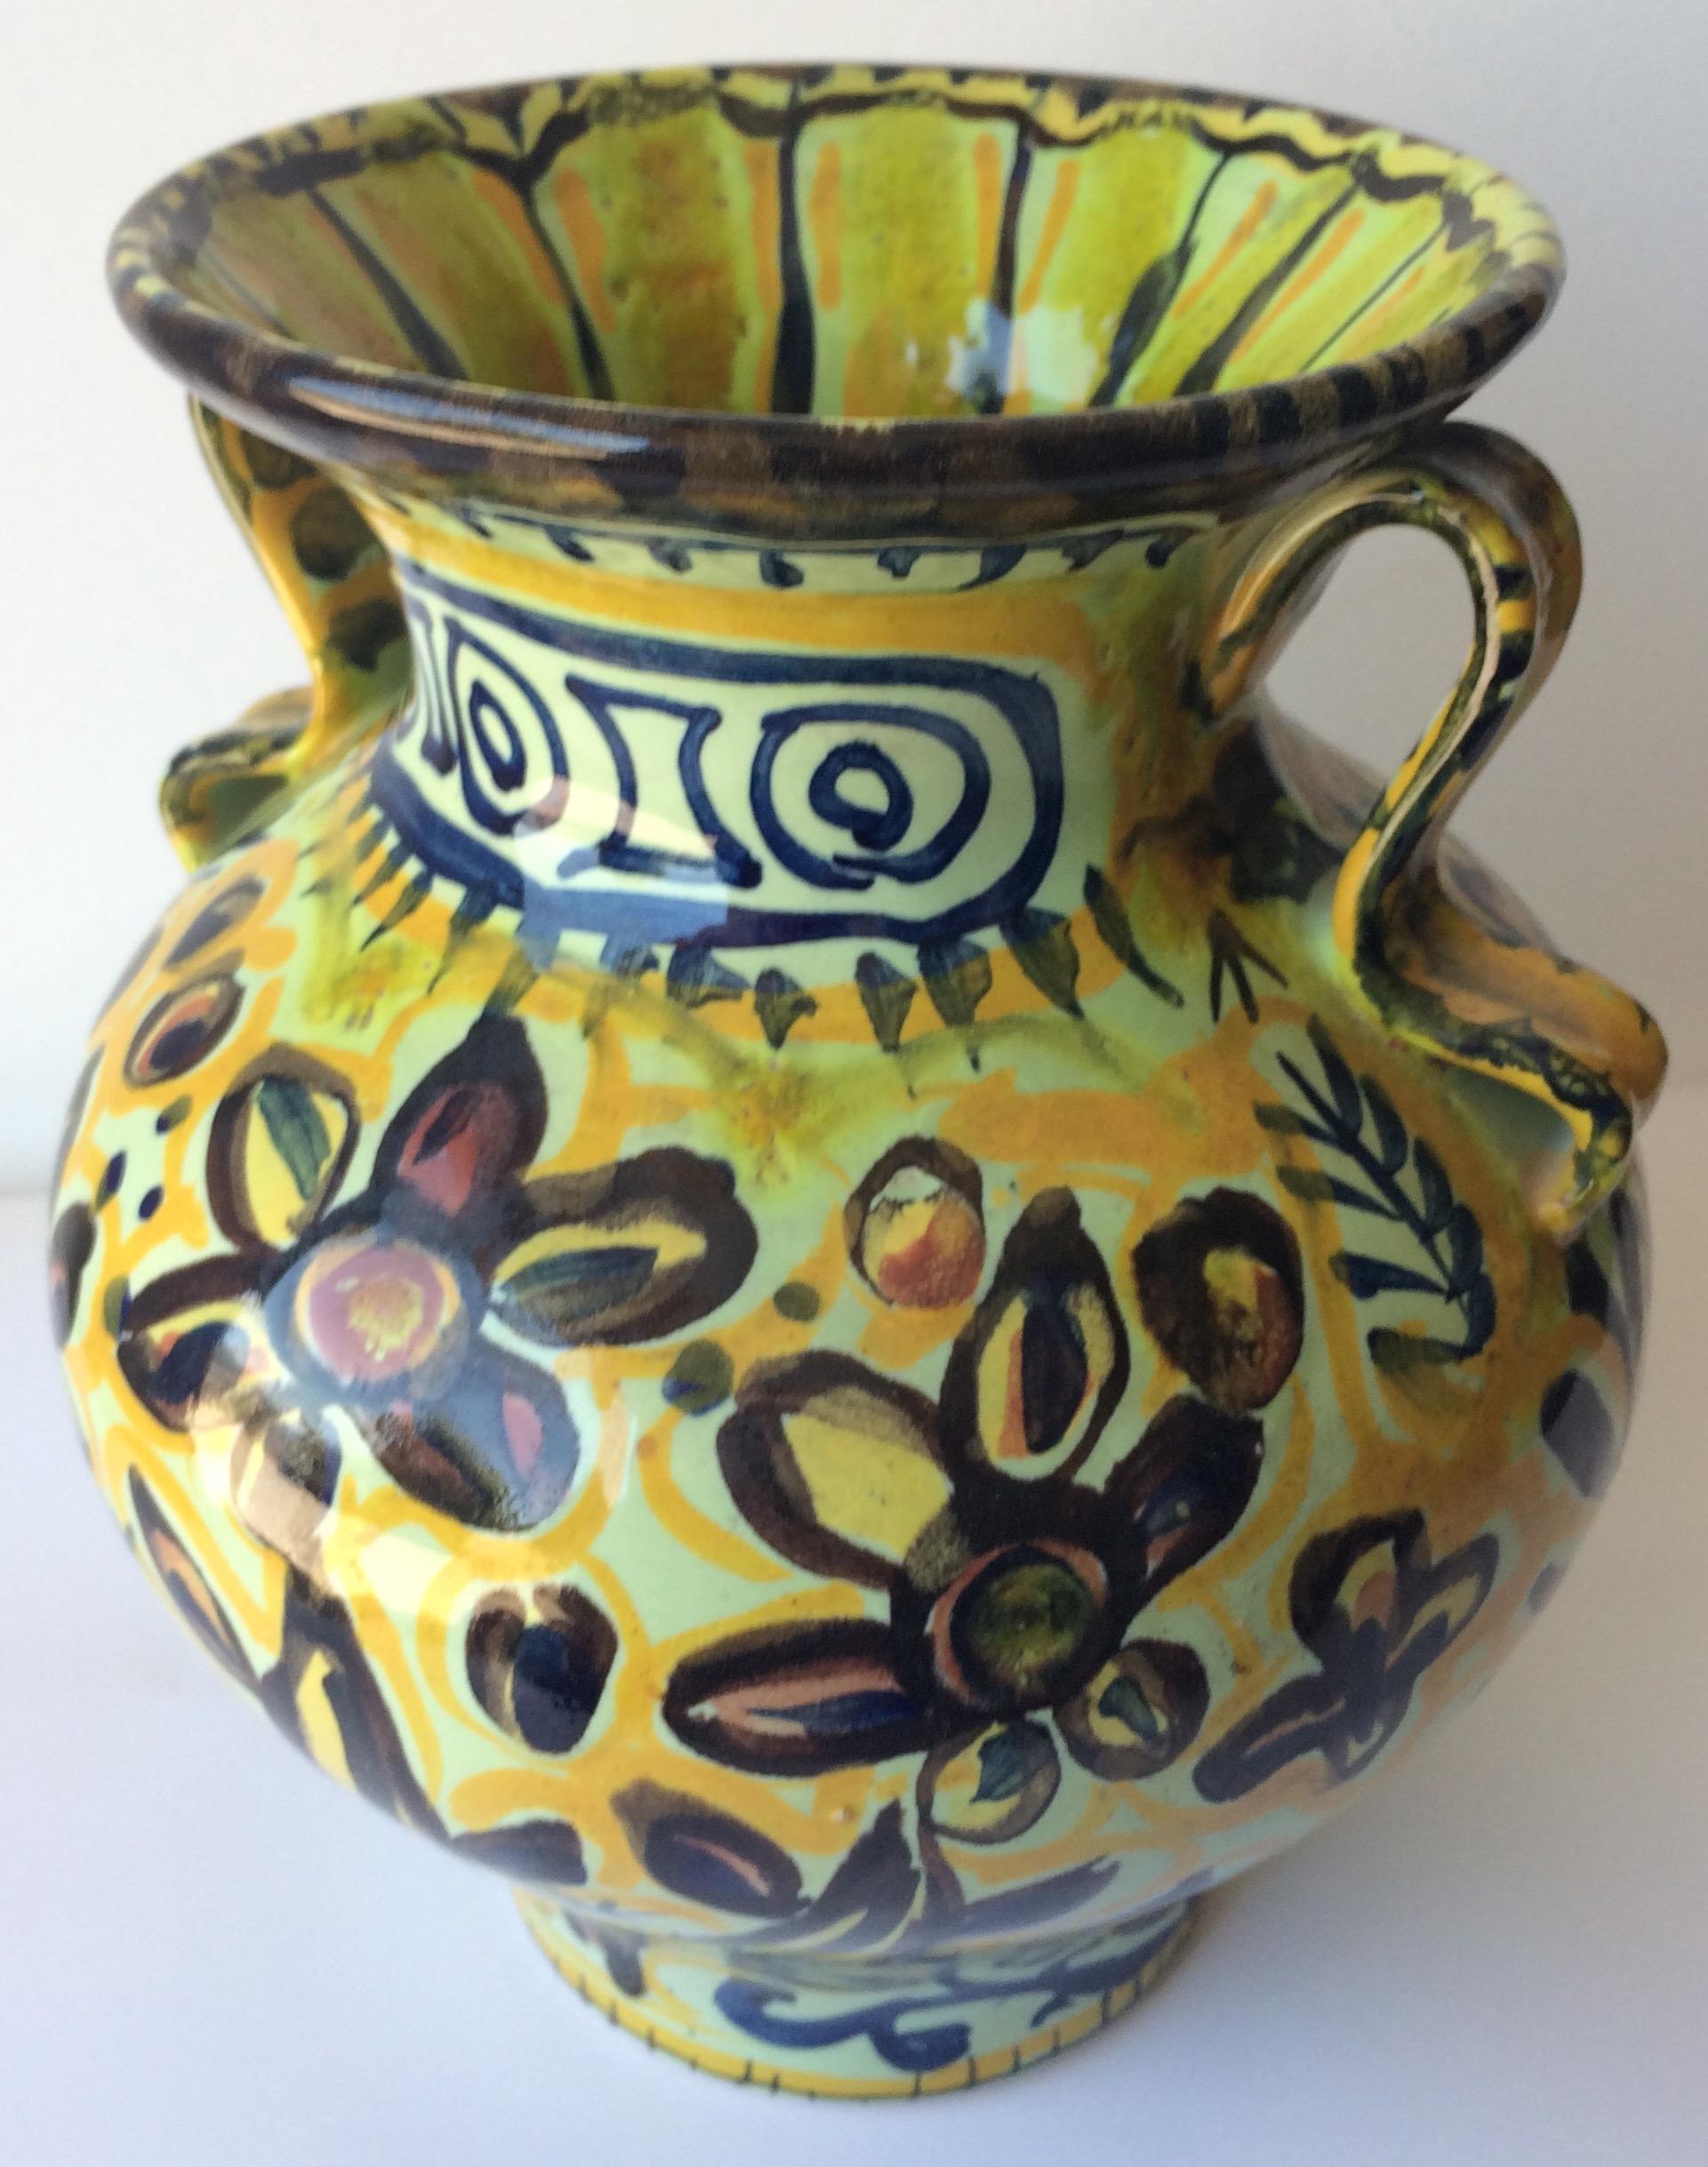 20th Century French Ceramic Vase with Handles from Quimper, France by Keraluc Pottery Studio